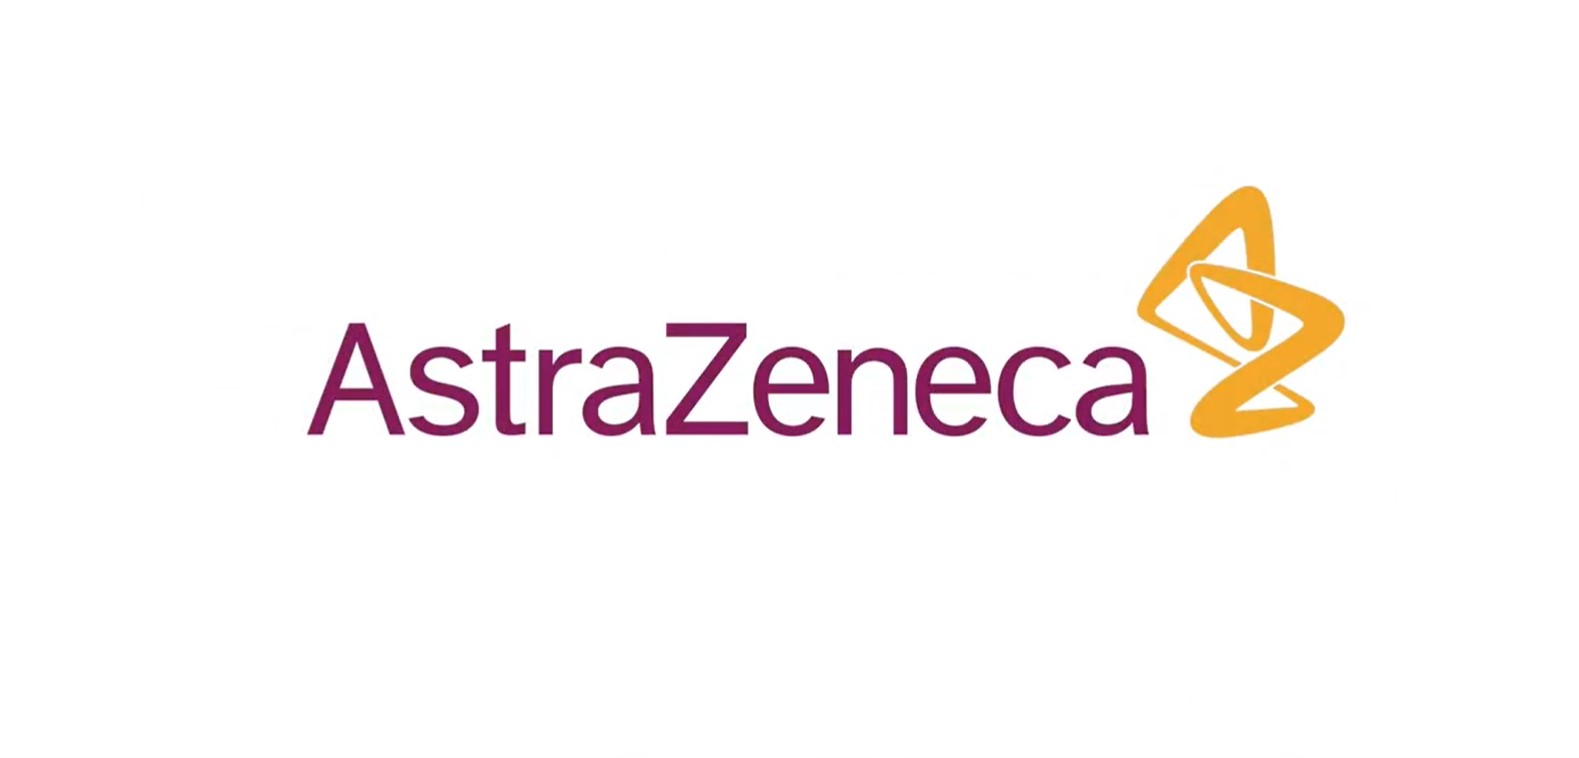 EU regulator launches real-time review of AstraZeneca's COVID-19 vaccine